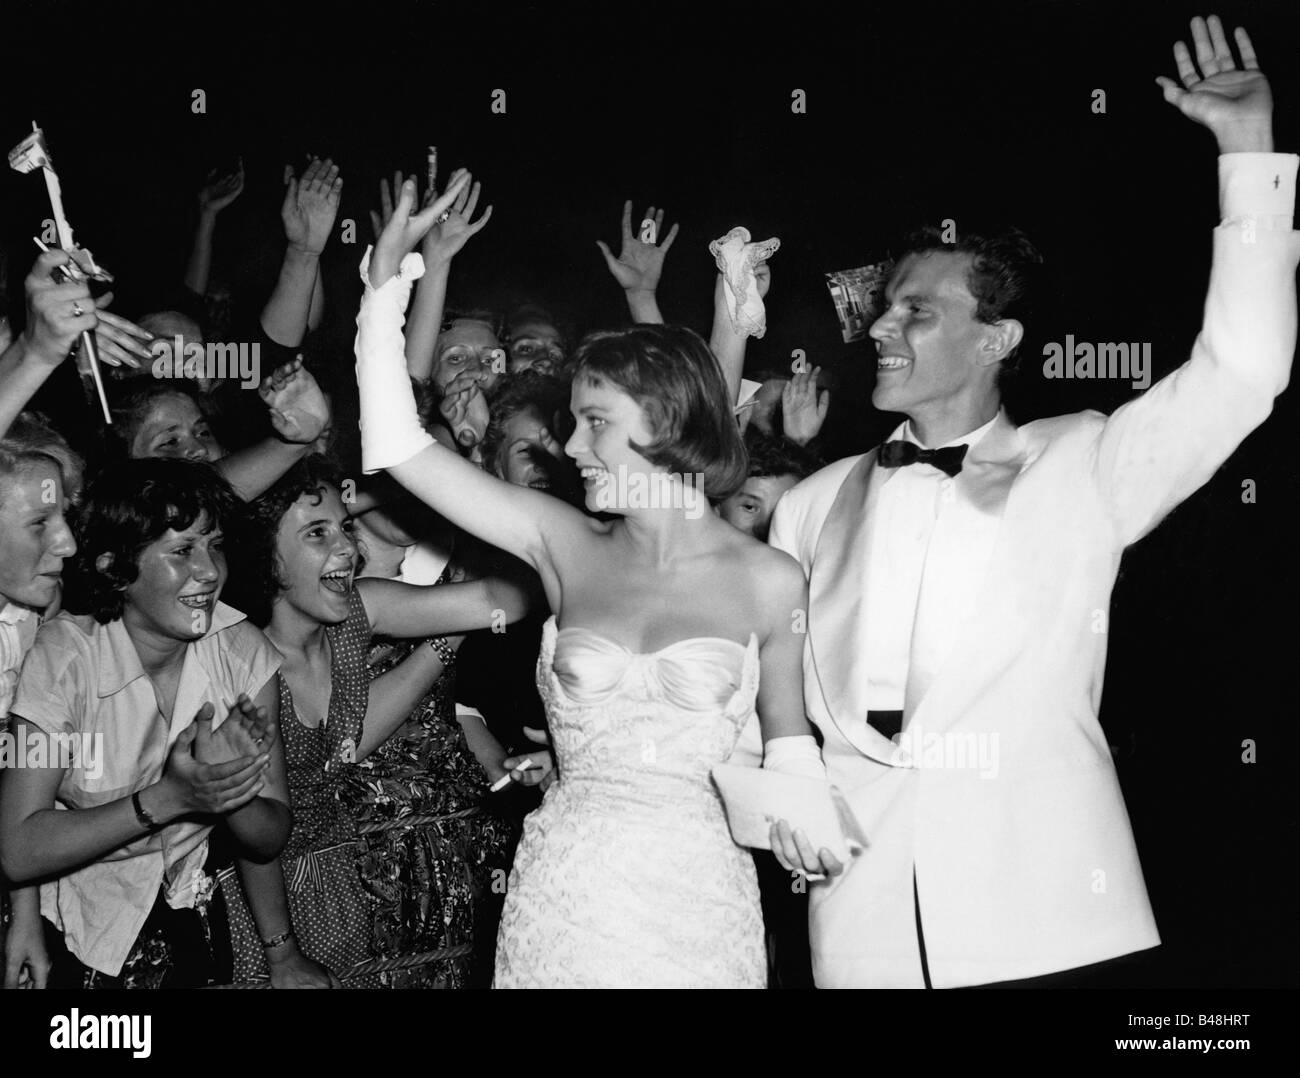 Jacobsson, Ulla 23.5.1929 - 24.8.1982, Swedish actress, dancing with Folke Lindquist, arrival at film ball, film festival, Berlin, 27.6.1957, Germany, festivity, Berlinale, female, woman, women, , Stock Photo